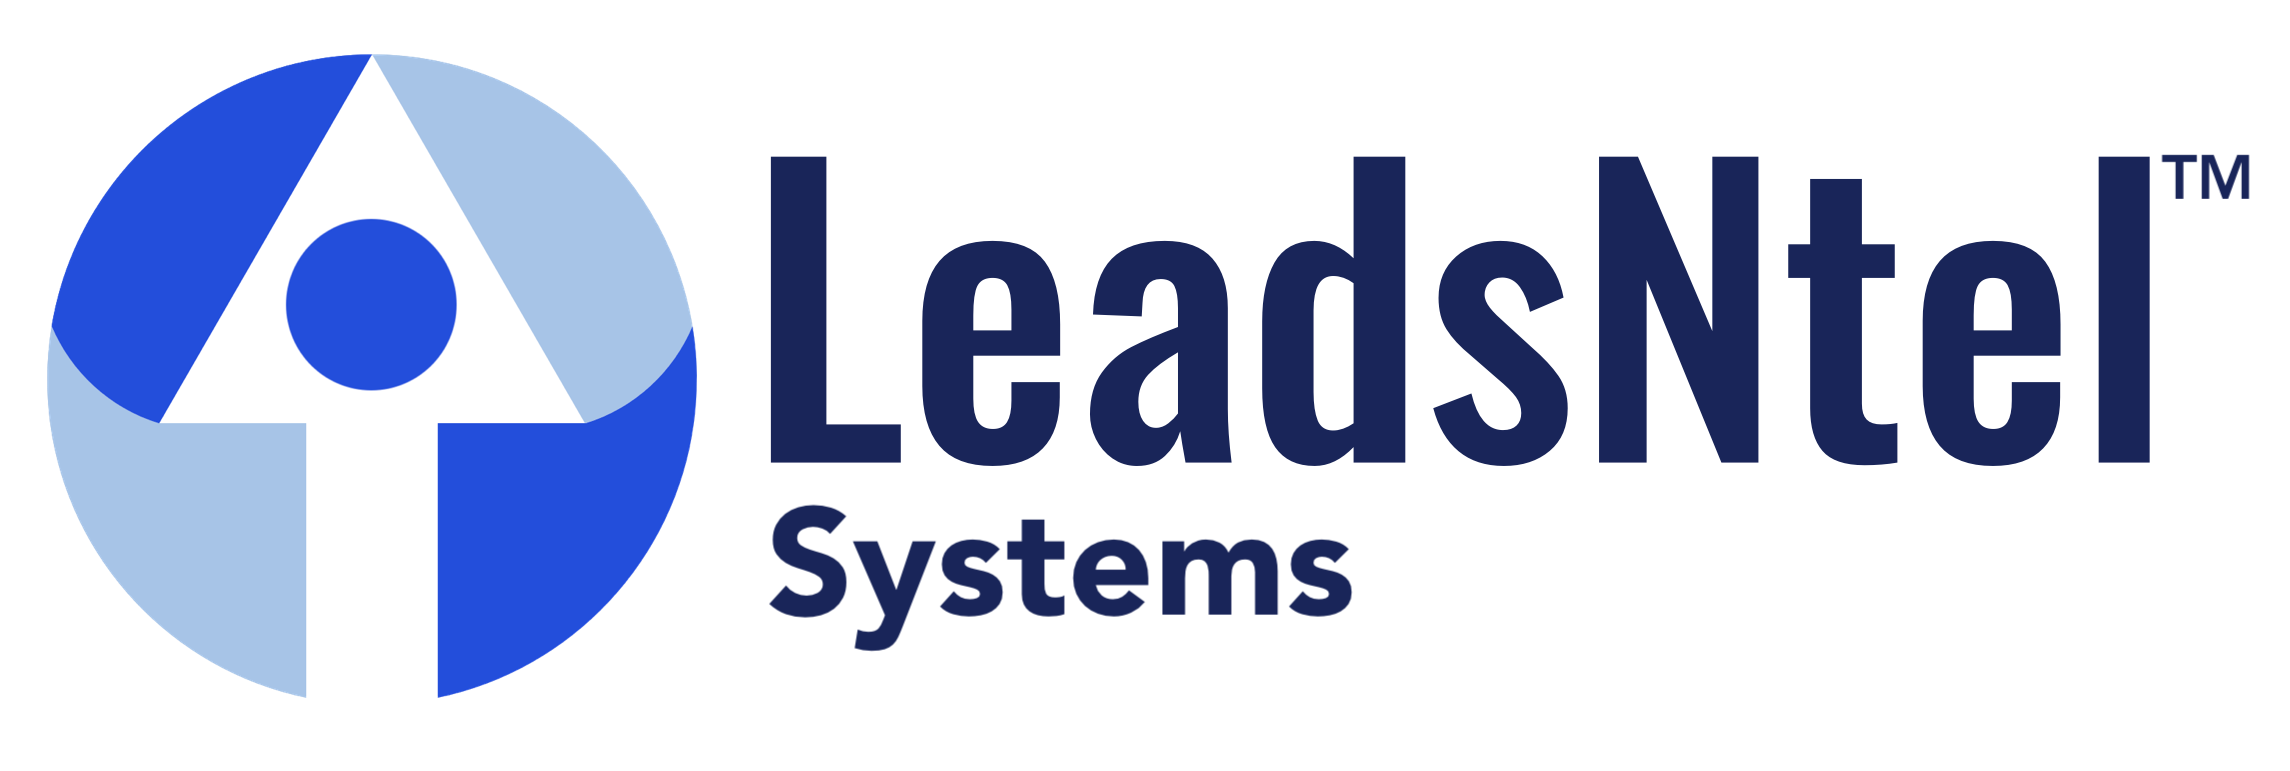 LeadsNtel Systems